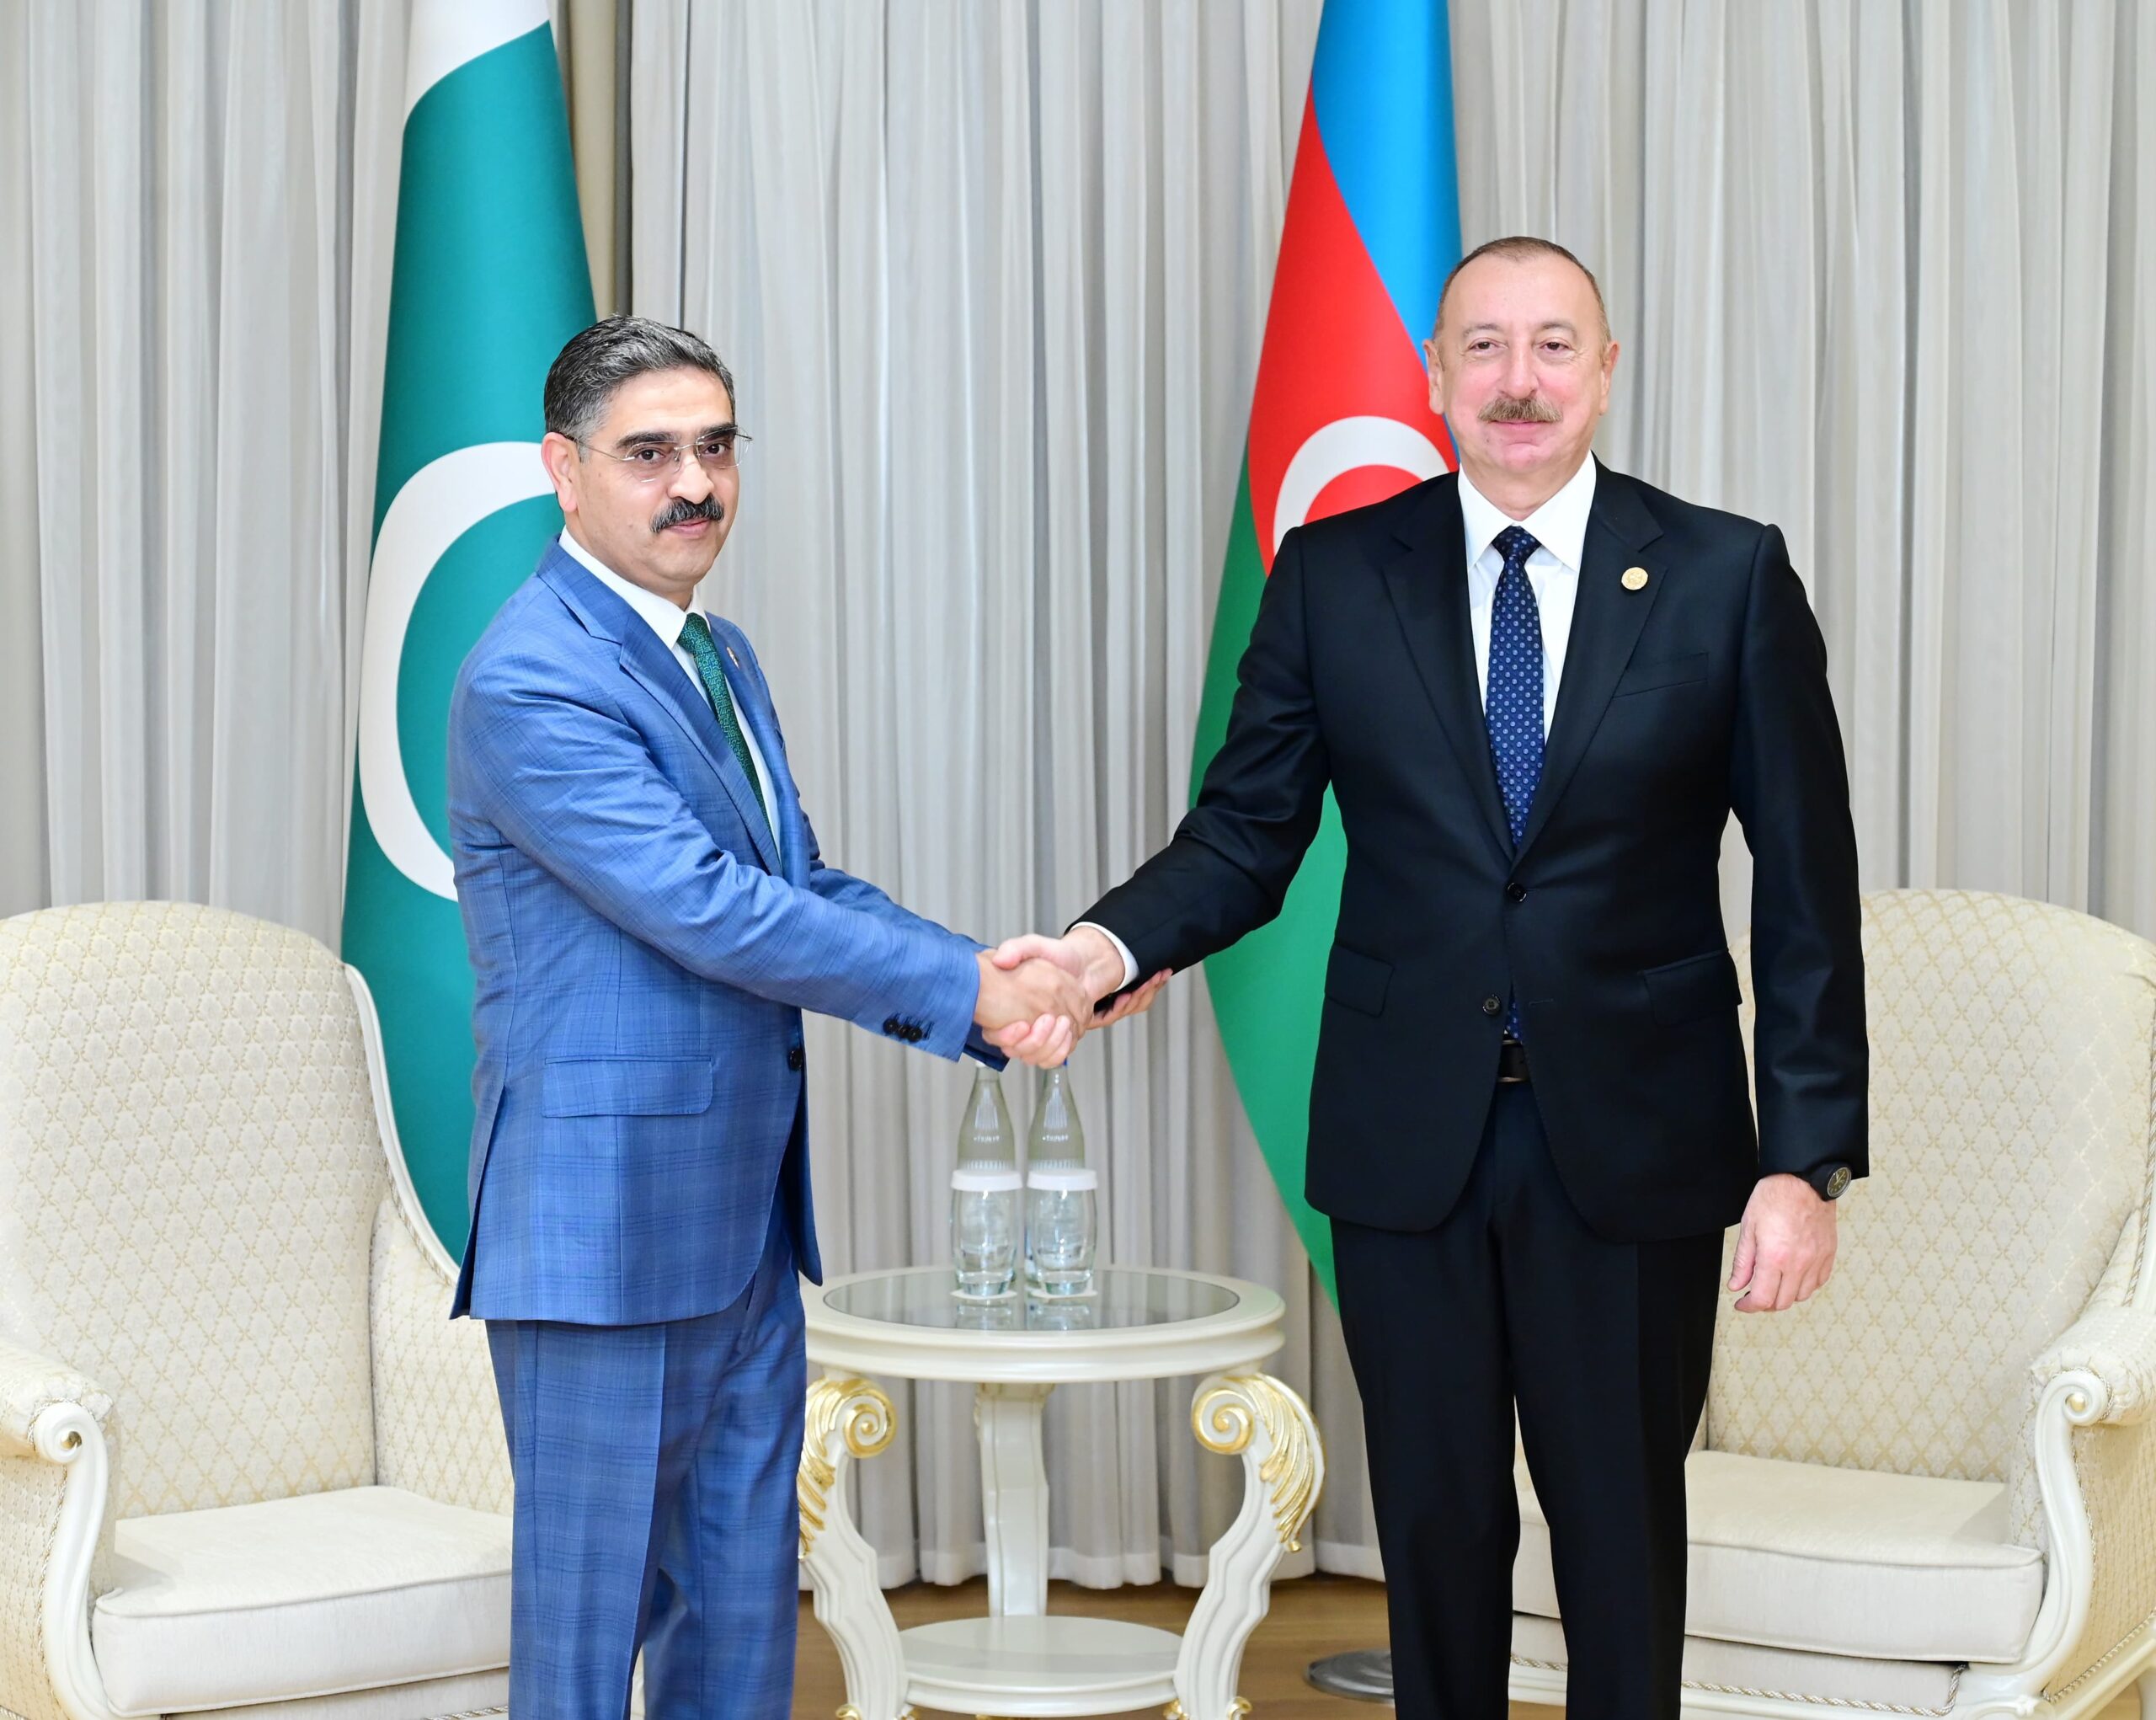 Prime Minister’s Bilateral Meeting with the President of the Republic of Azerbaijan